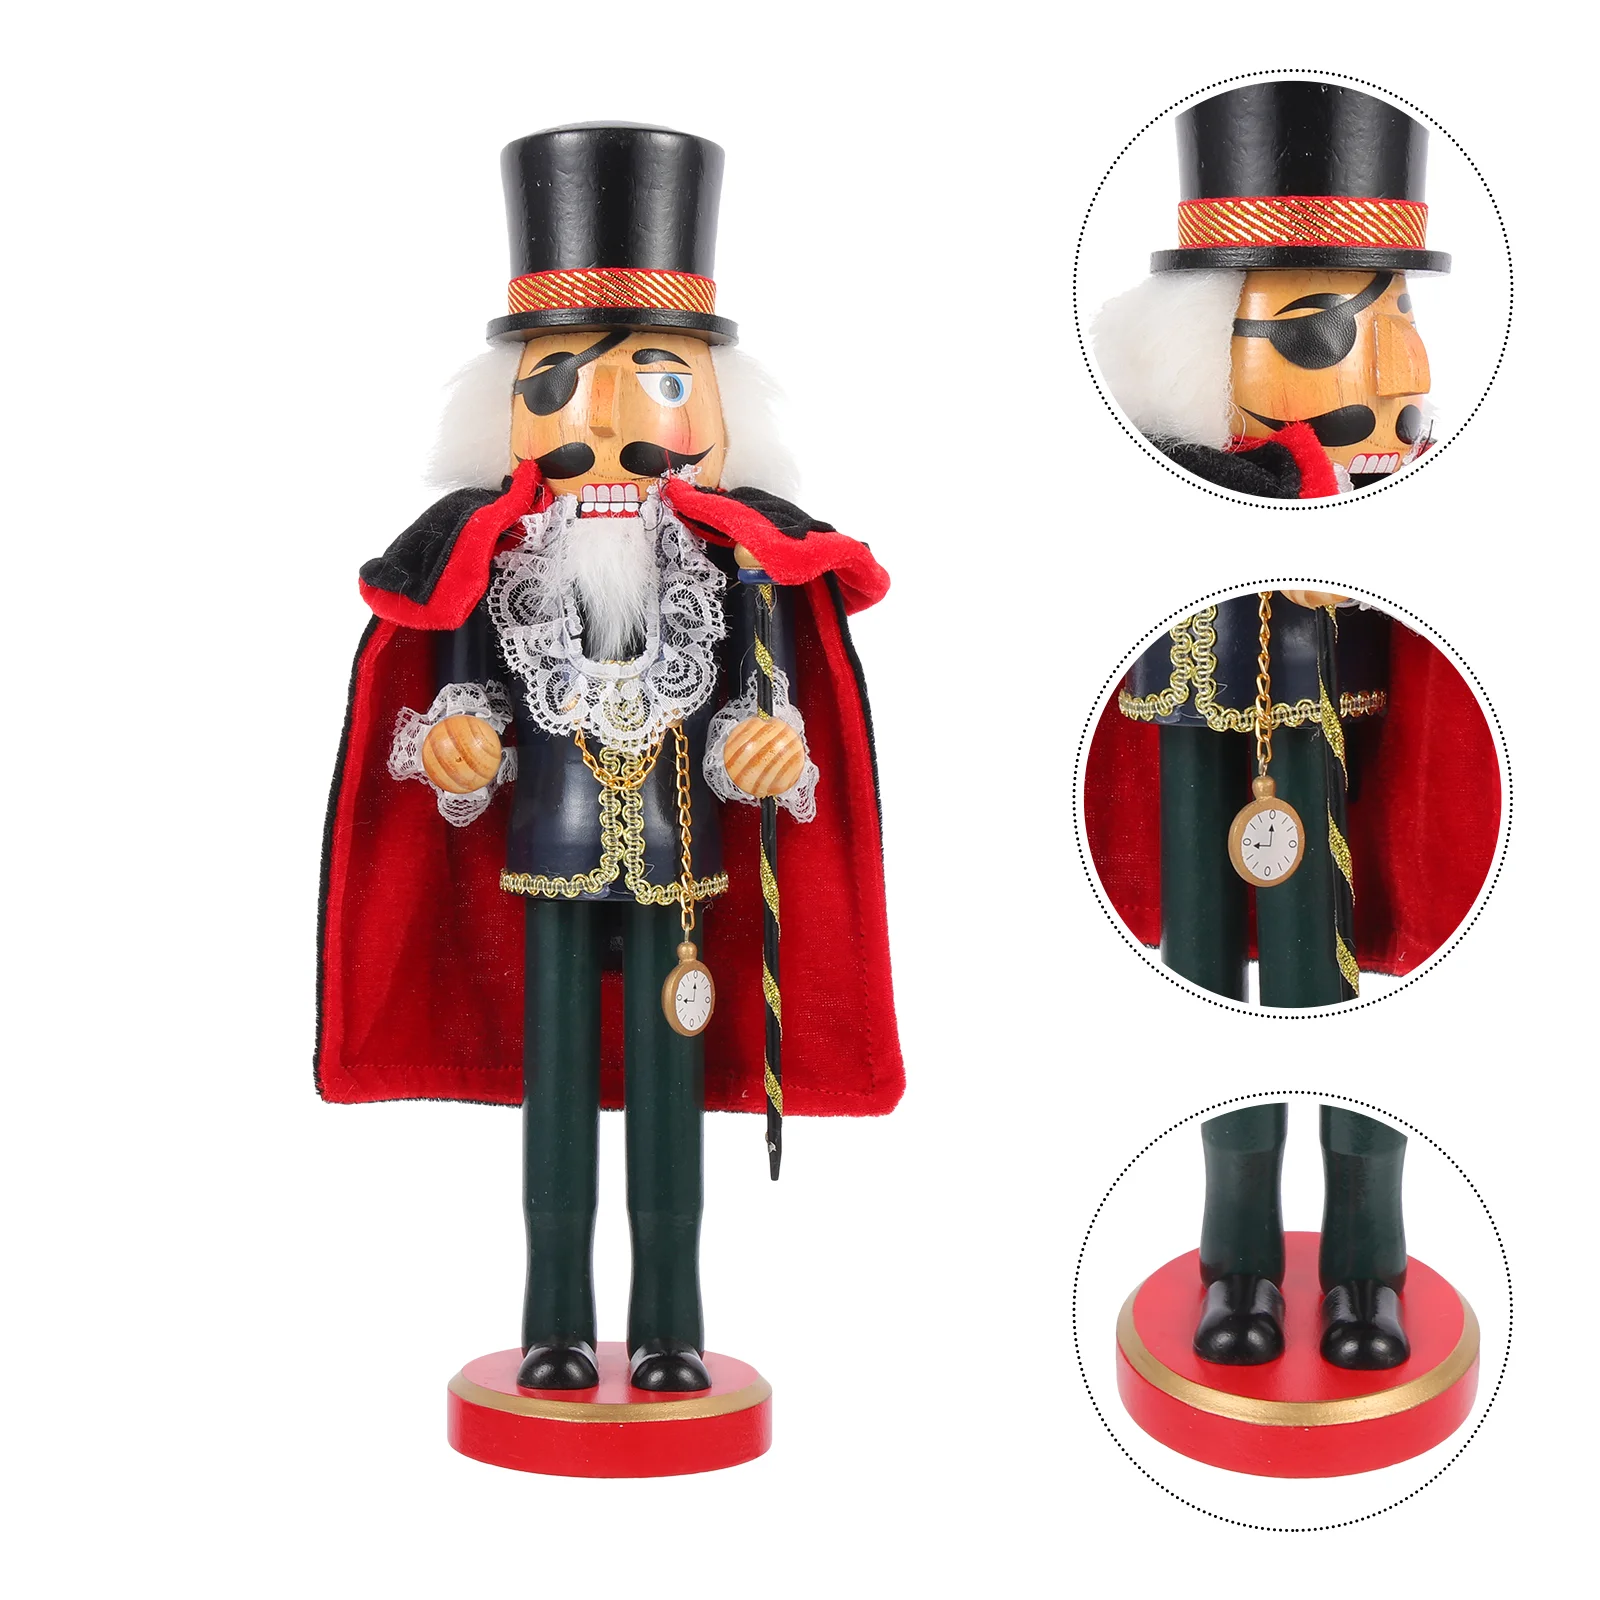 

Pirate Nutcracker Wood Nutcrackers Outdoor Kid Toys Wooden Traditional Decorations Ornaments Craft Festival Child